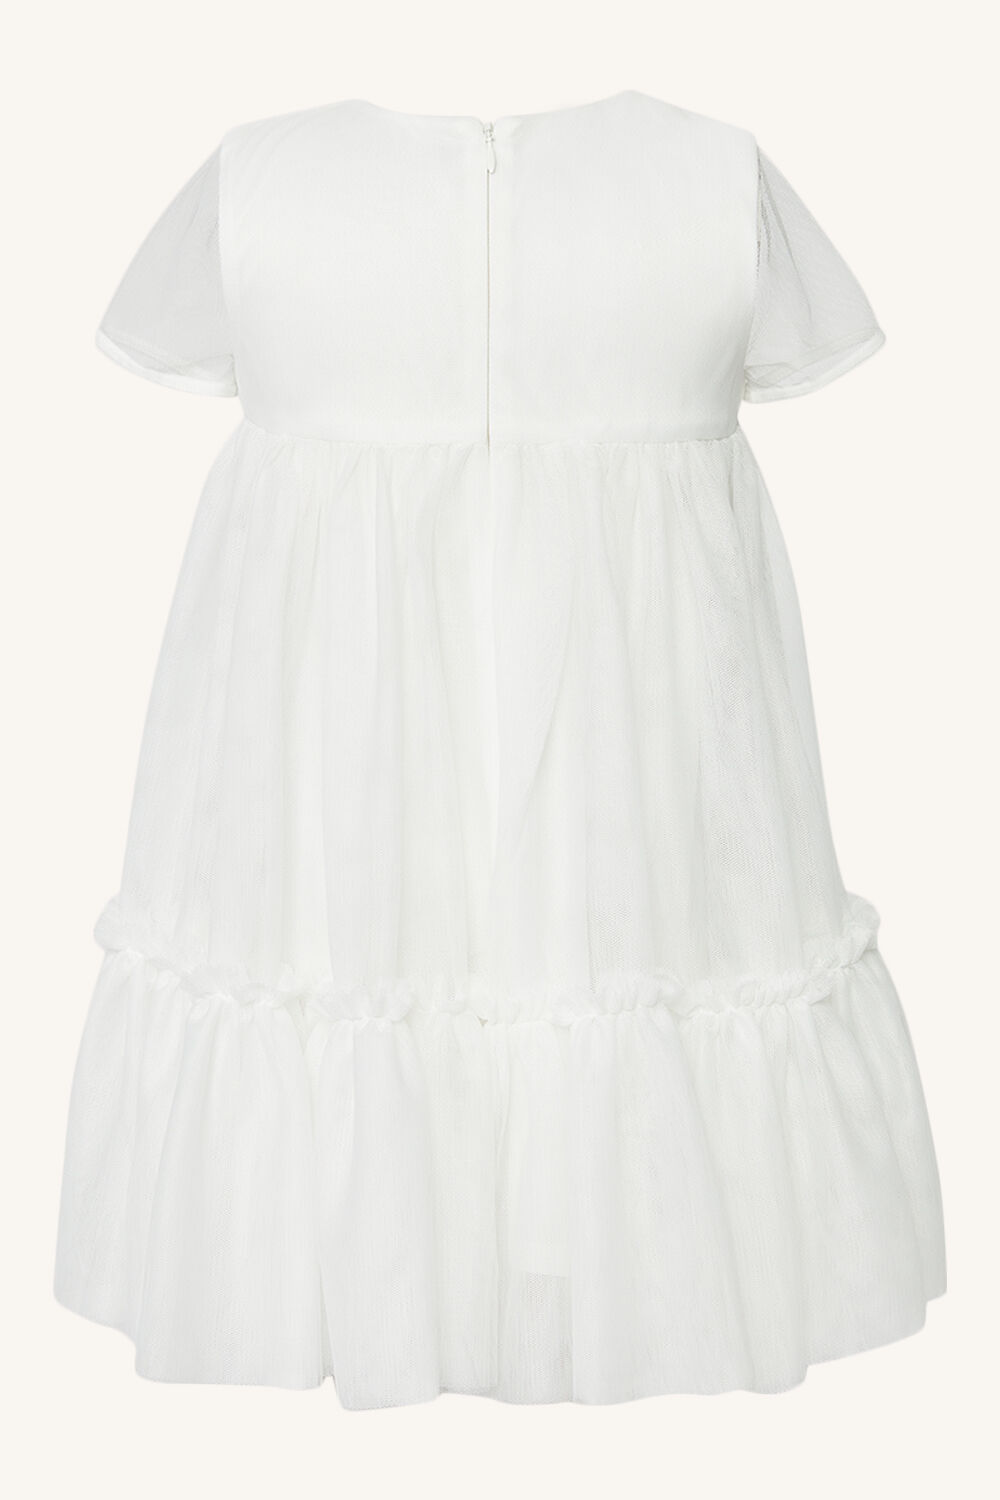 ALLY TIERED MESH DRESS in colour BRIGHT WHITE